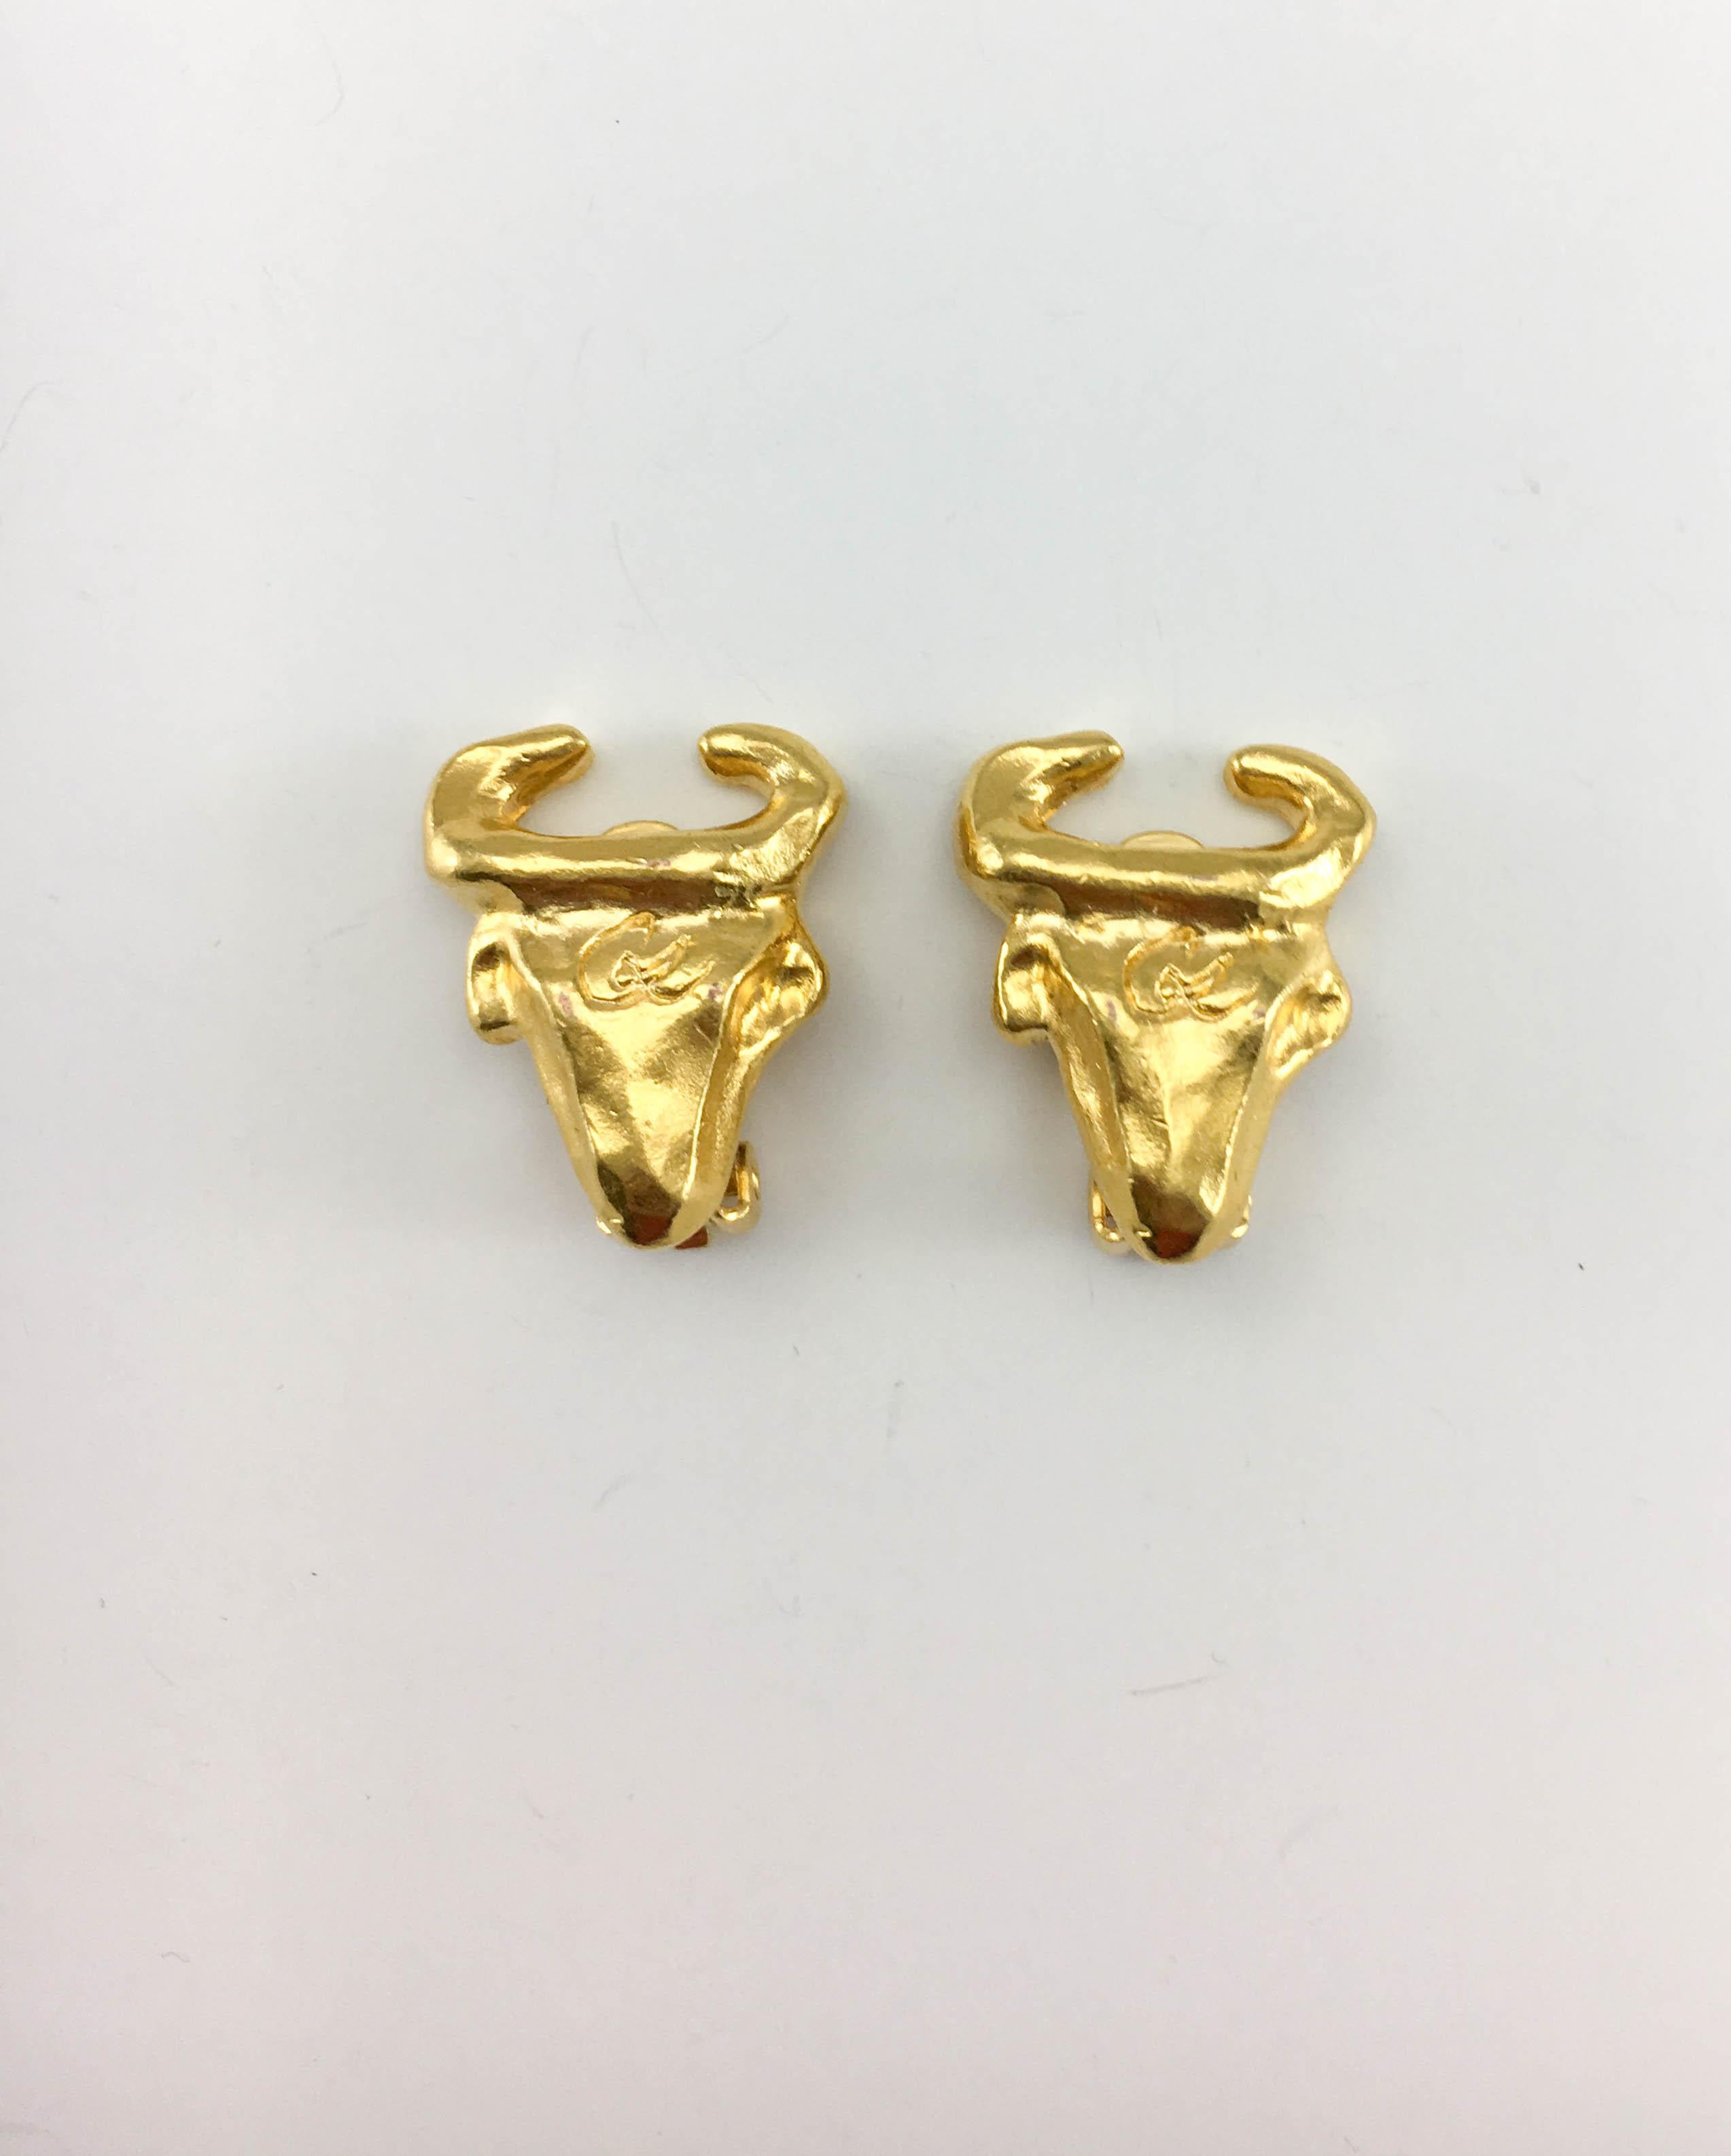 Vintage Christian Lacroix Gold-Plated Bull Head Clip-On Earrings. These striking earrings by Lacroix date back from the 1990’s. Crafted in gold-plated metal, they feature a stylised bull head with the Christian Lacroix logo engraved on the forehead.